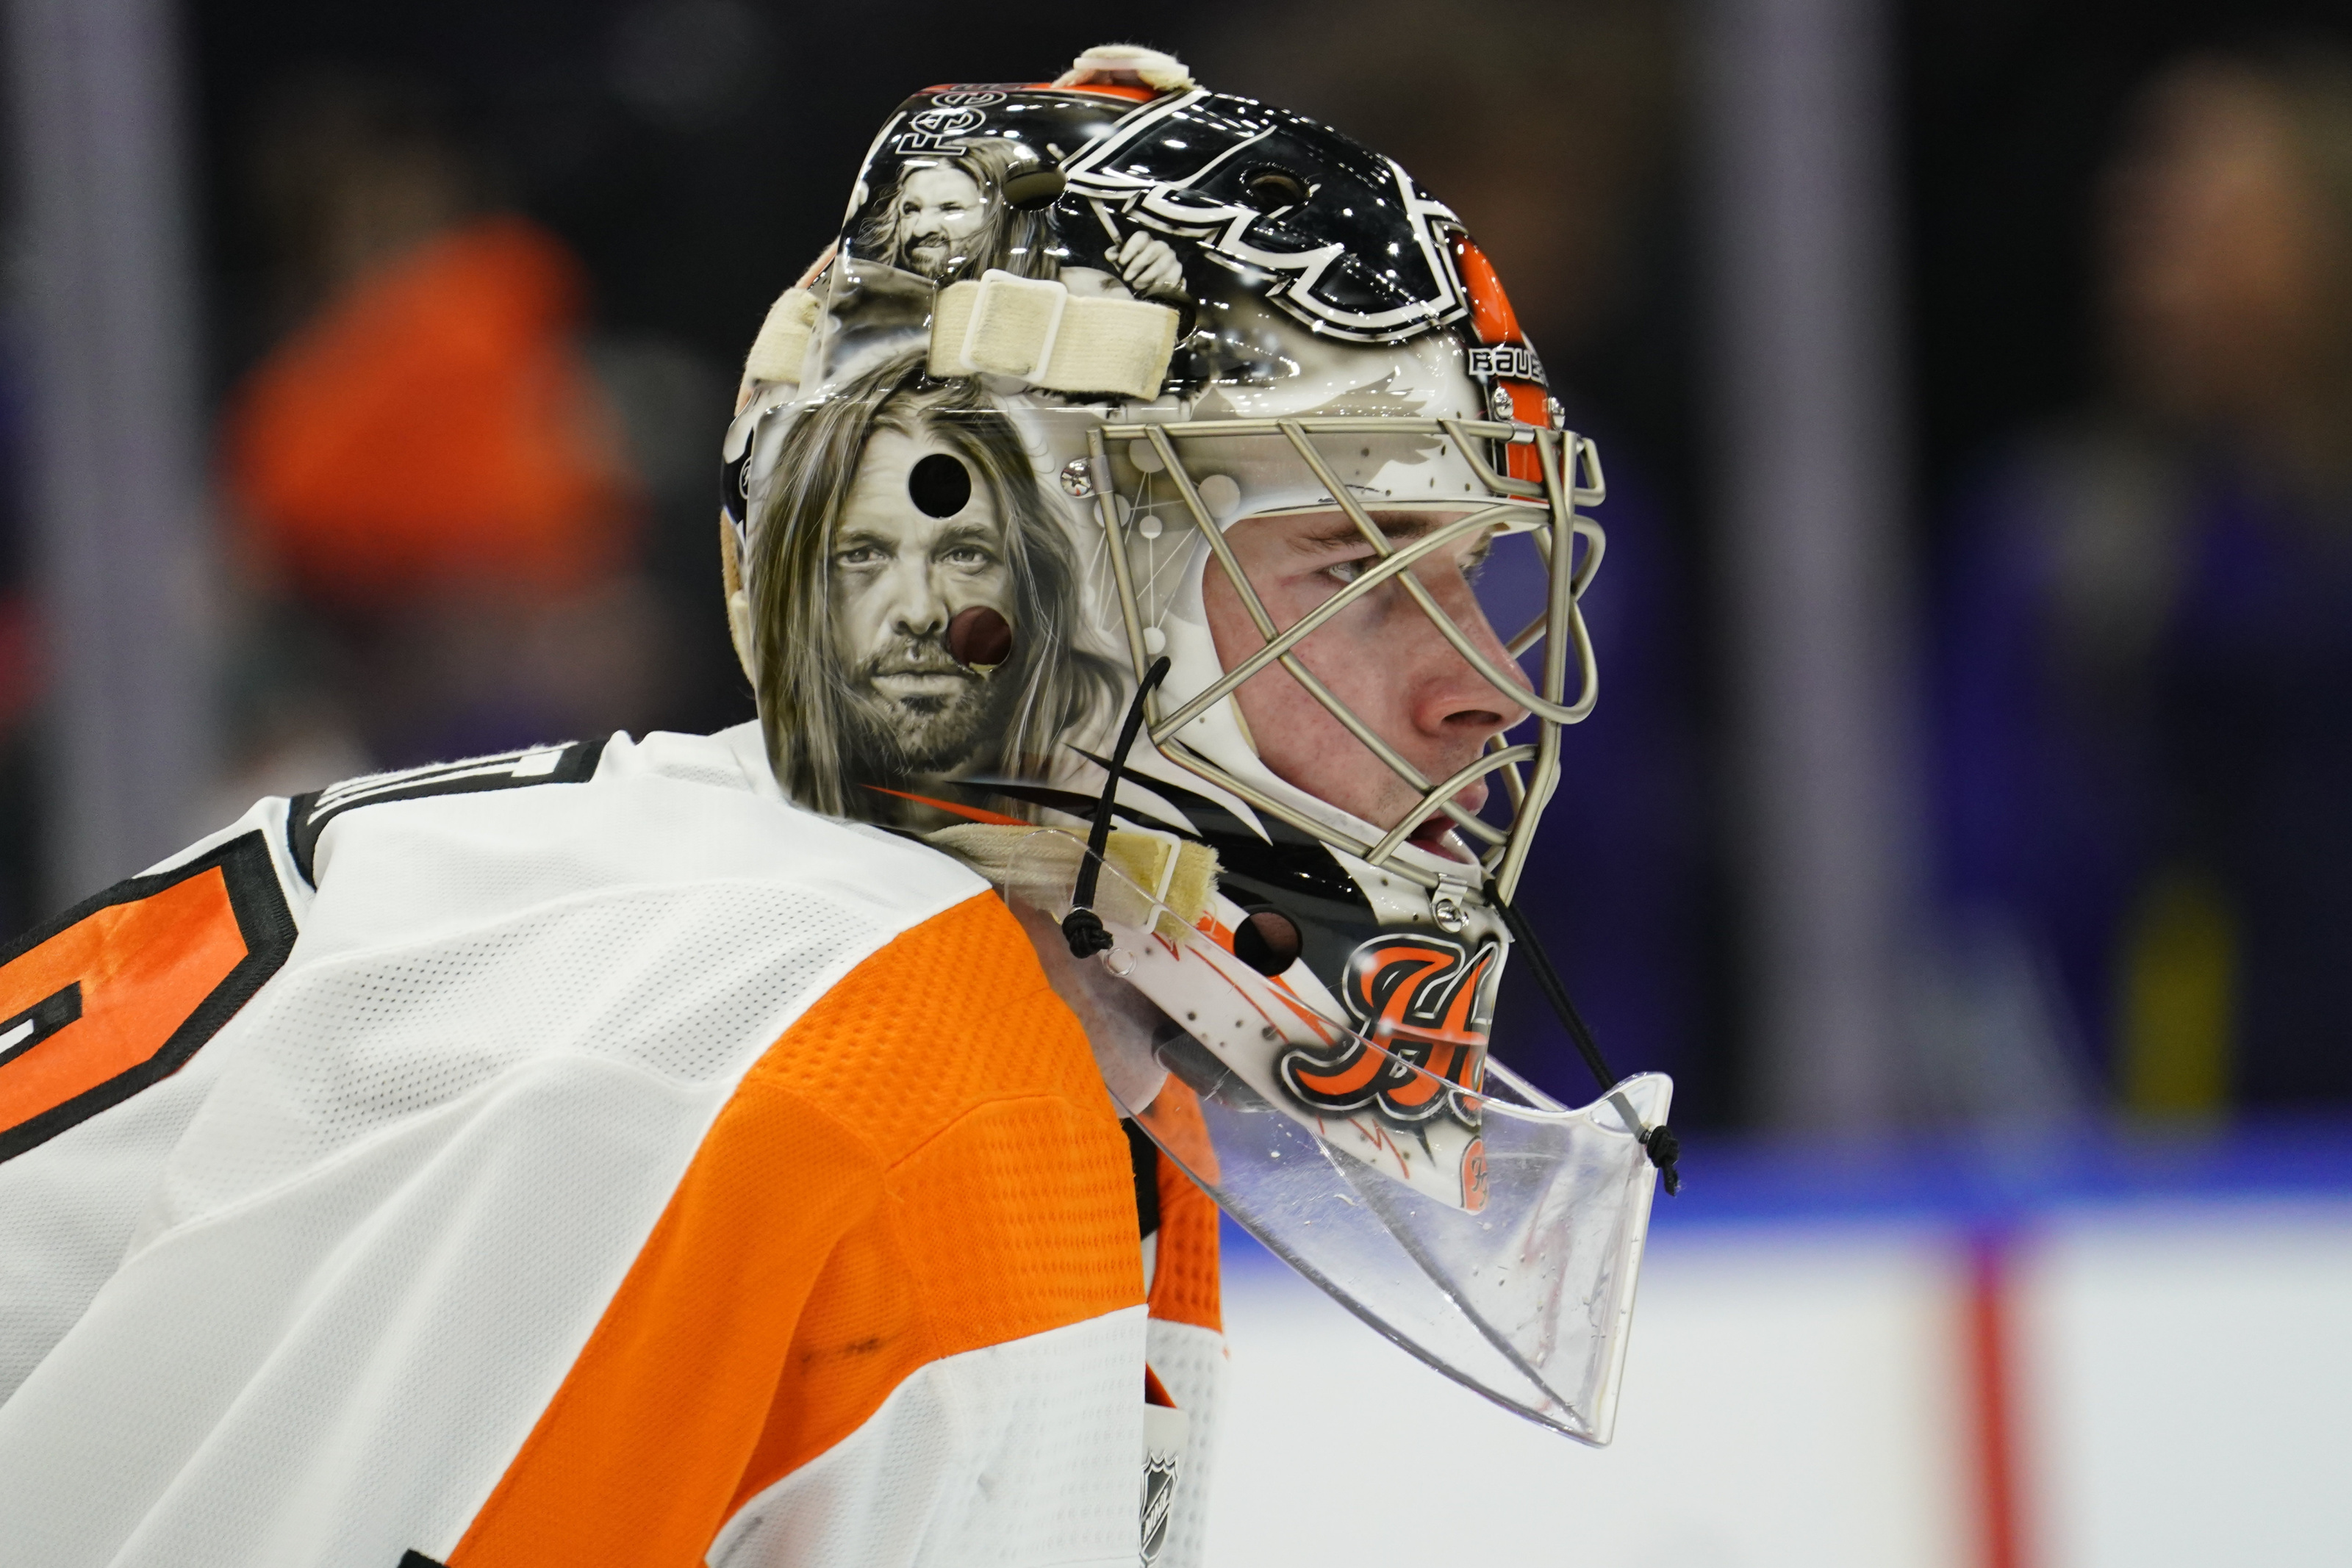 Flyers' Hart unavailable with illness, Willman added to COVID-19 protocol